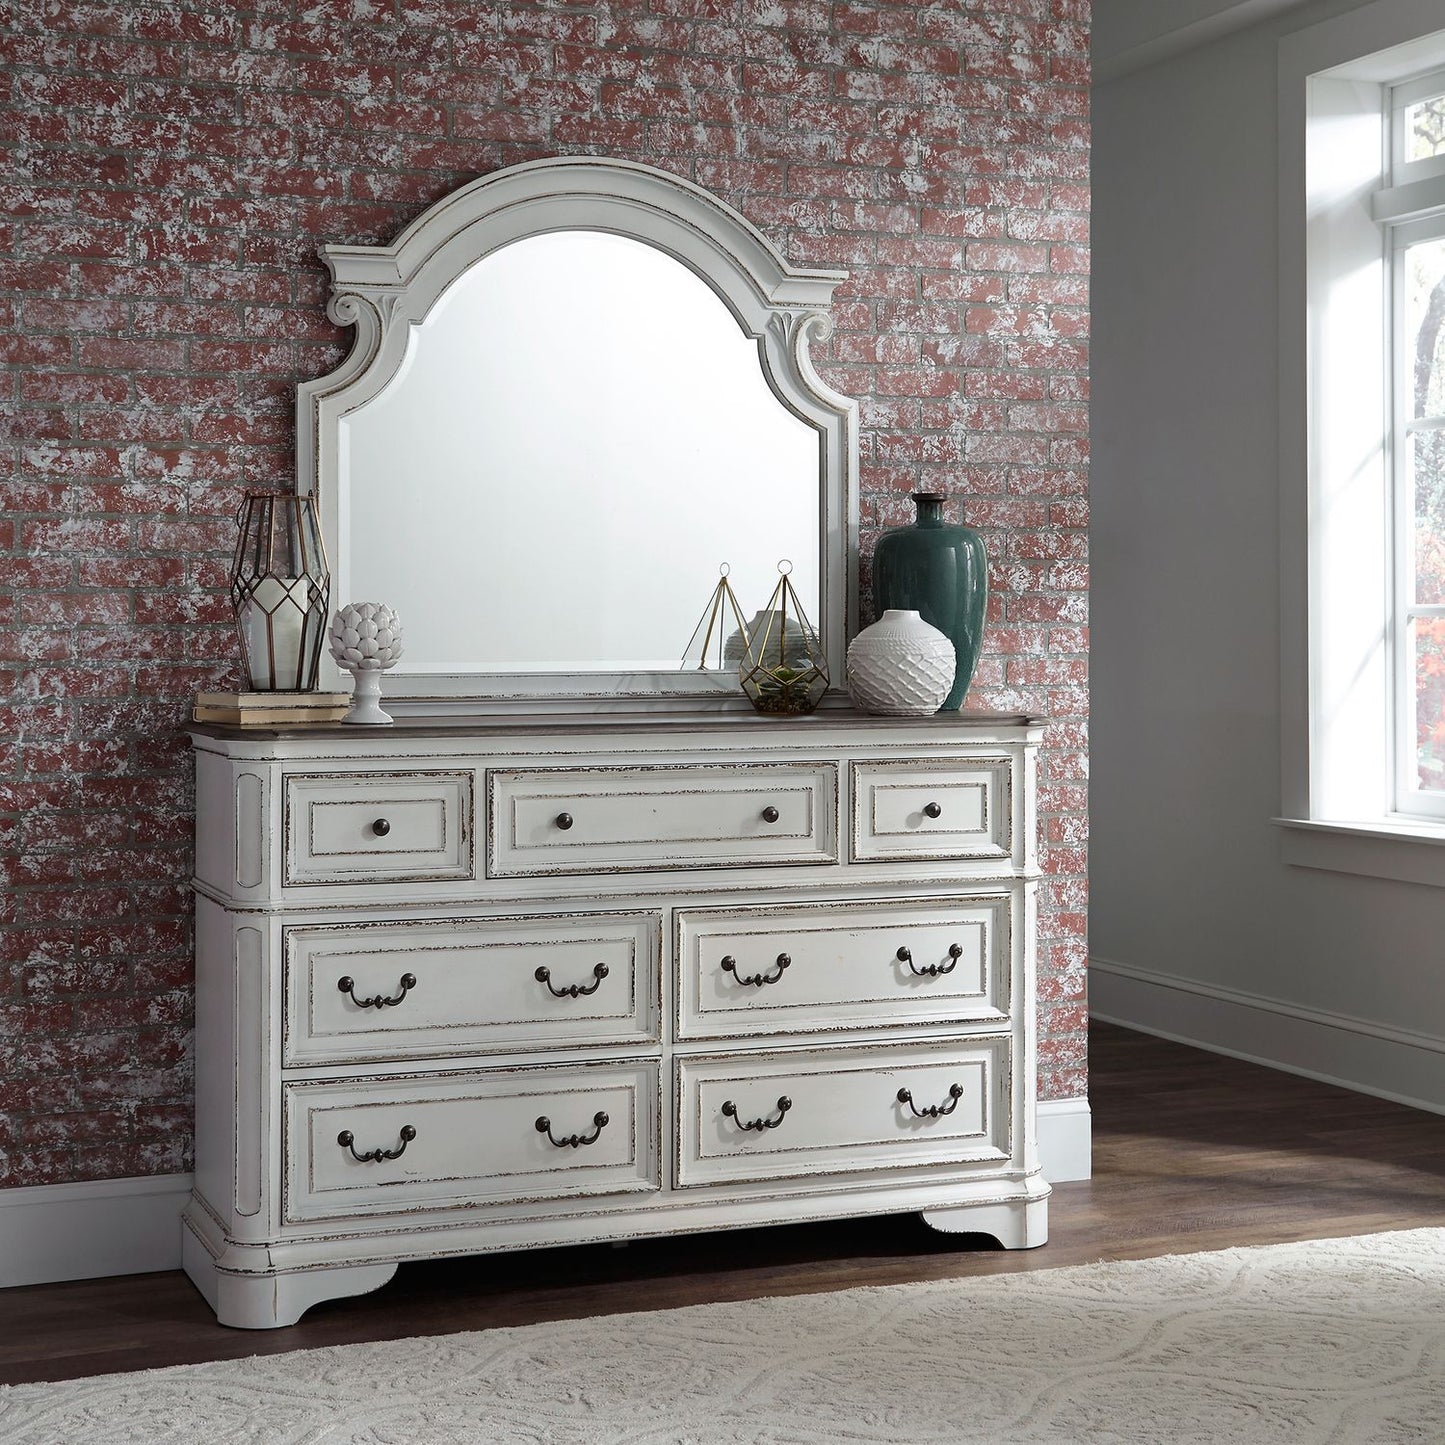 Magnolia Manor - King Uph Bed, Dresser & Mirror, Chest, Night Stand